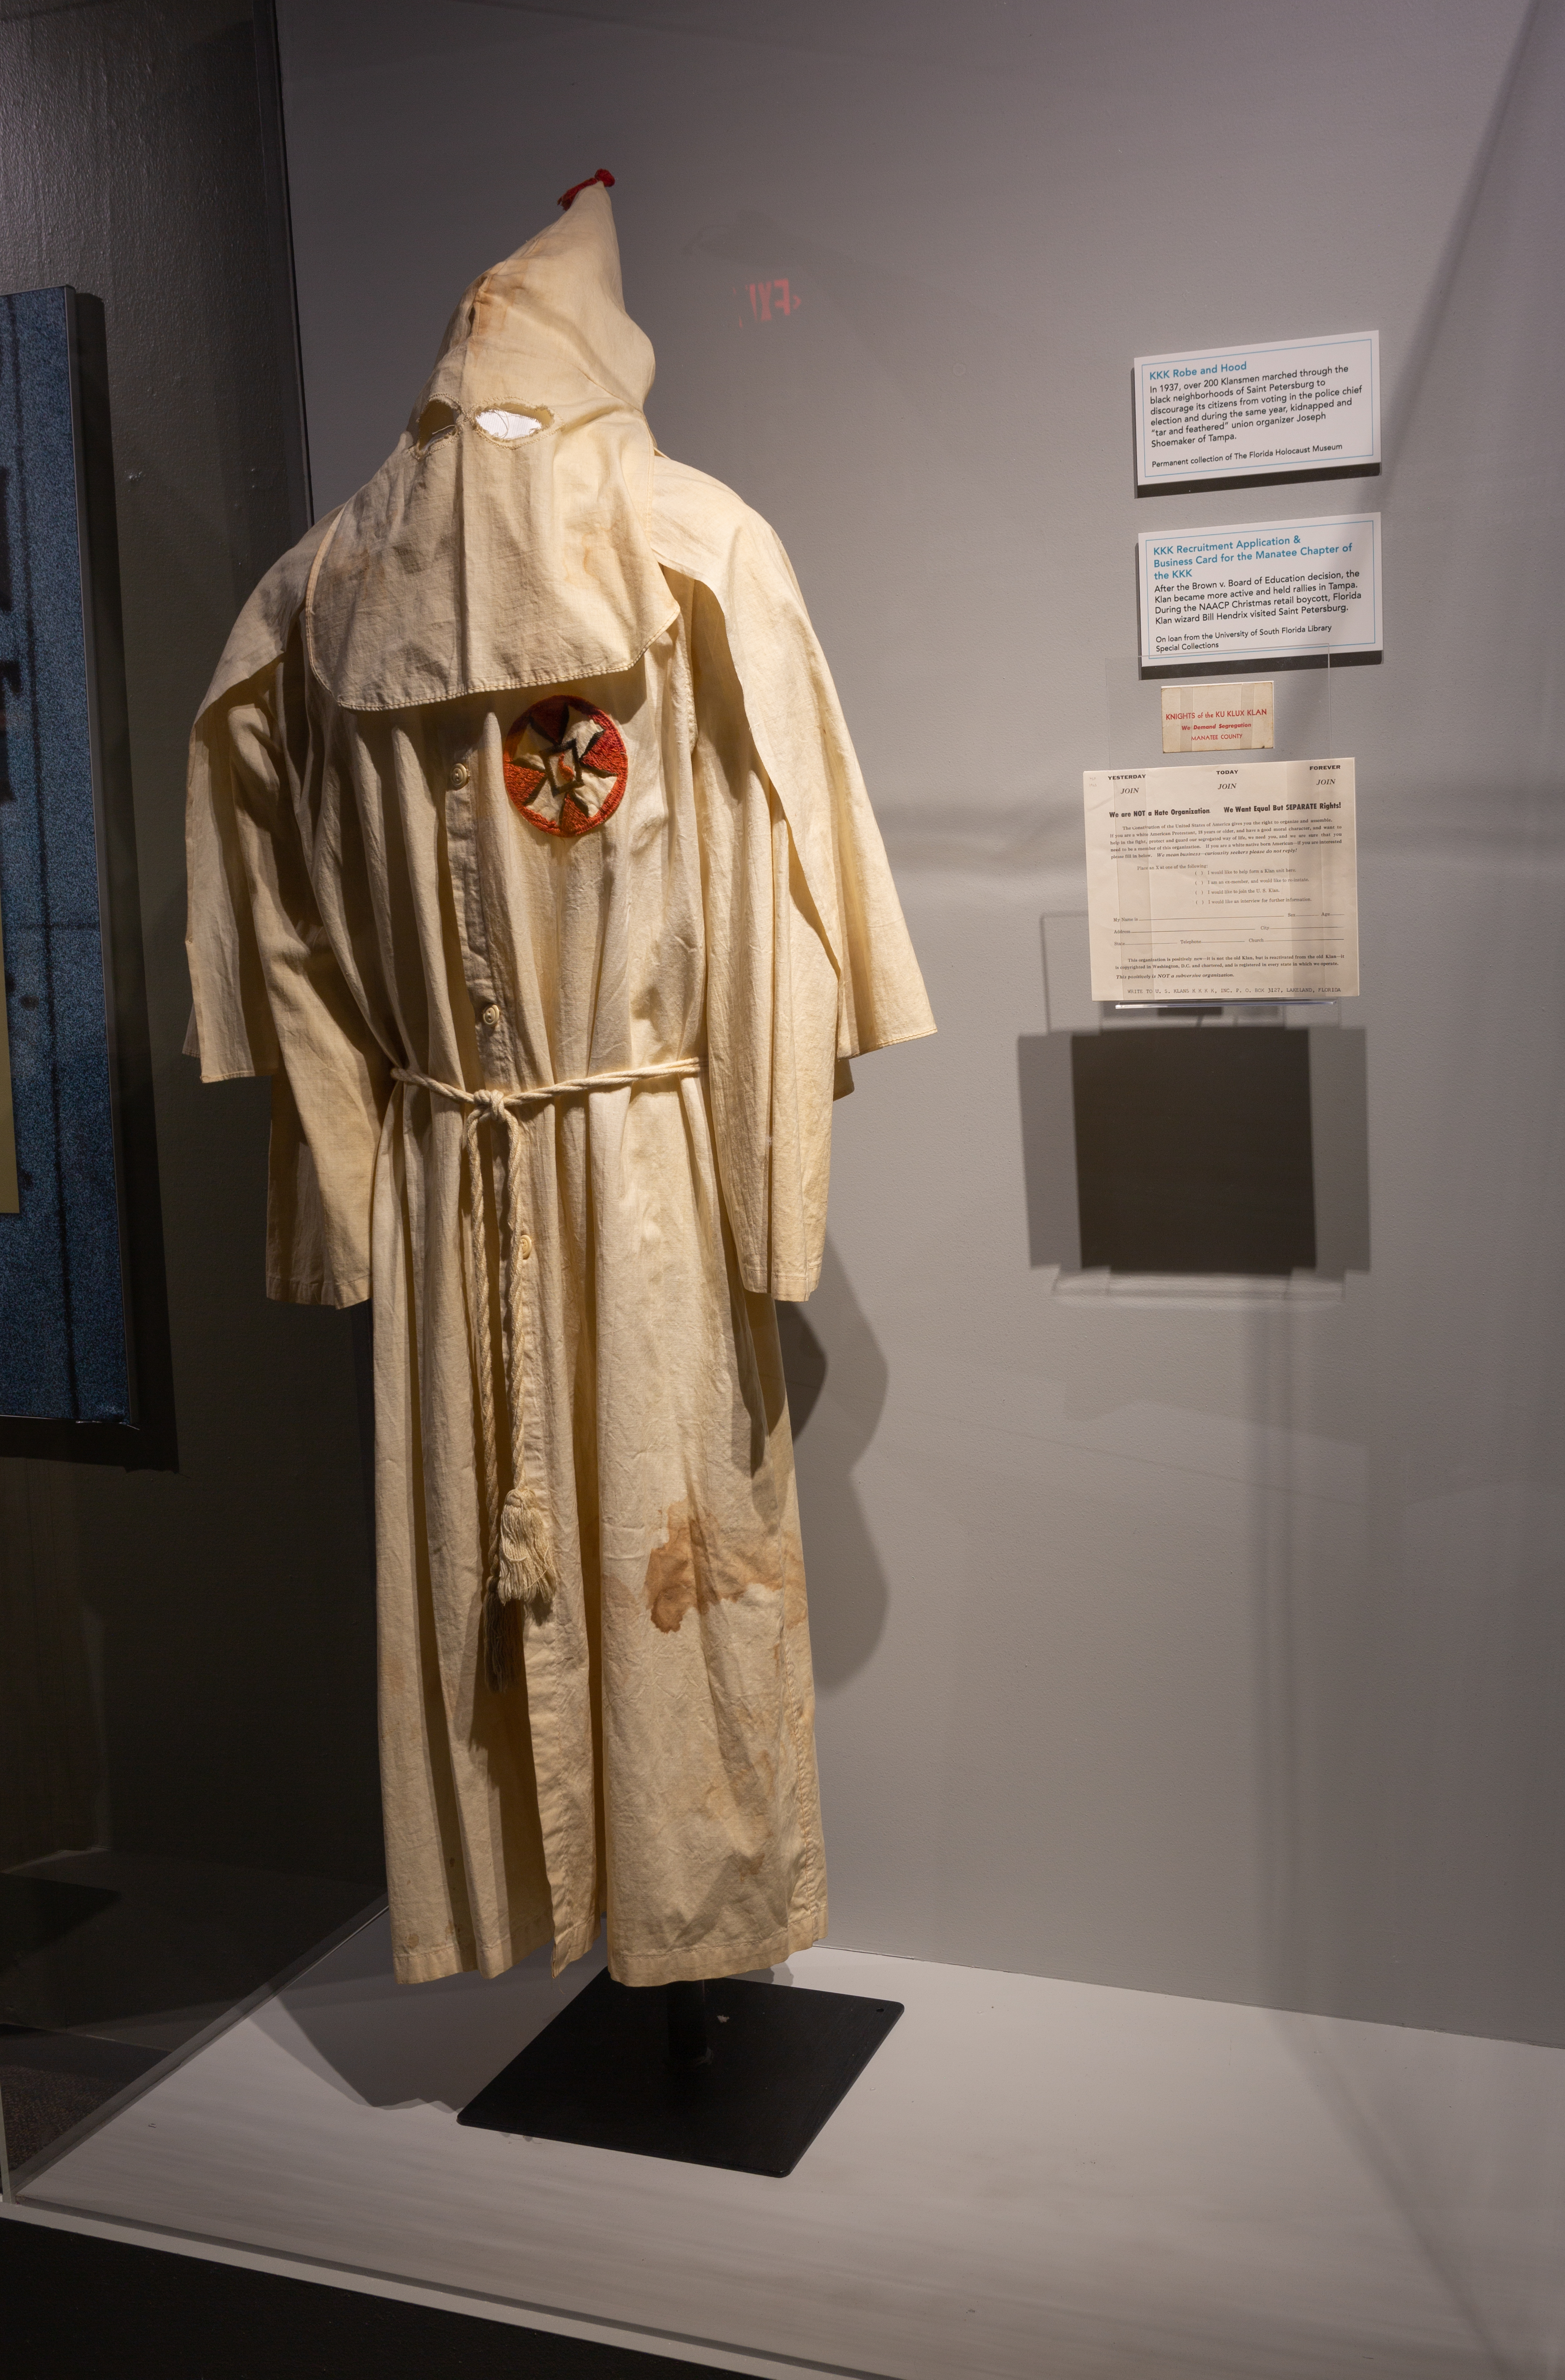 KKK Robes Donated To African American Museum